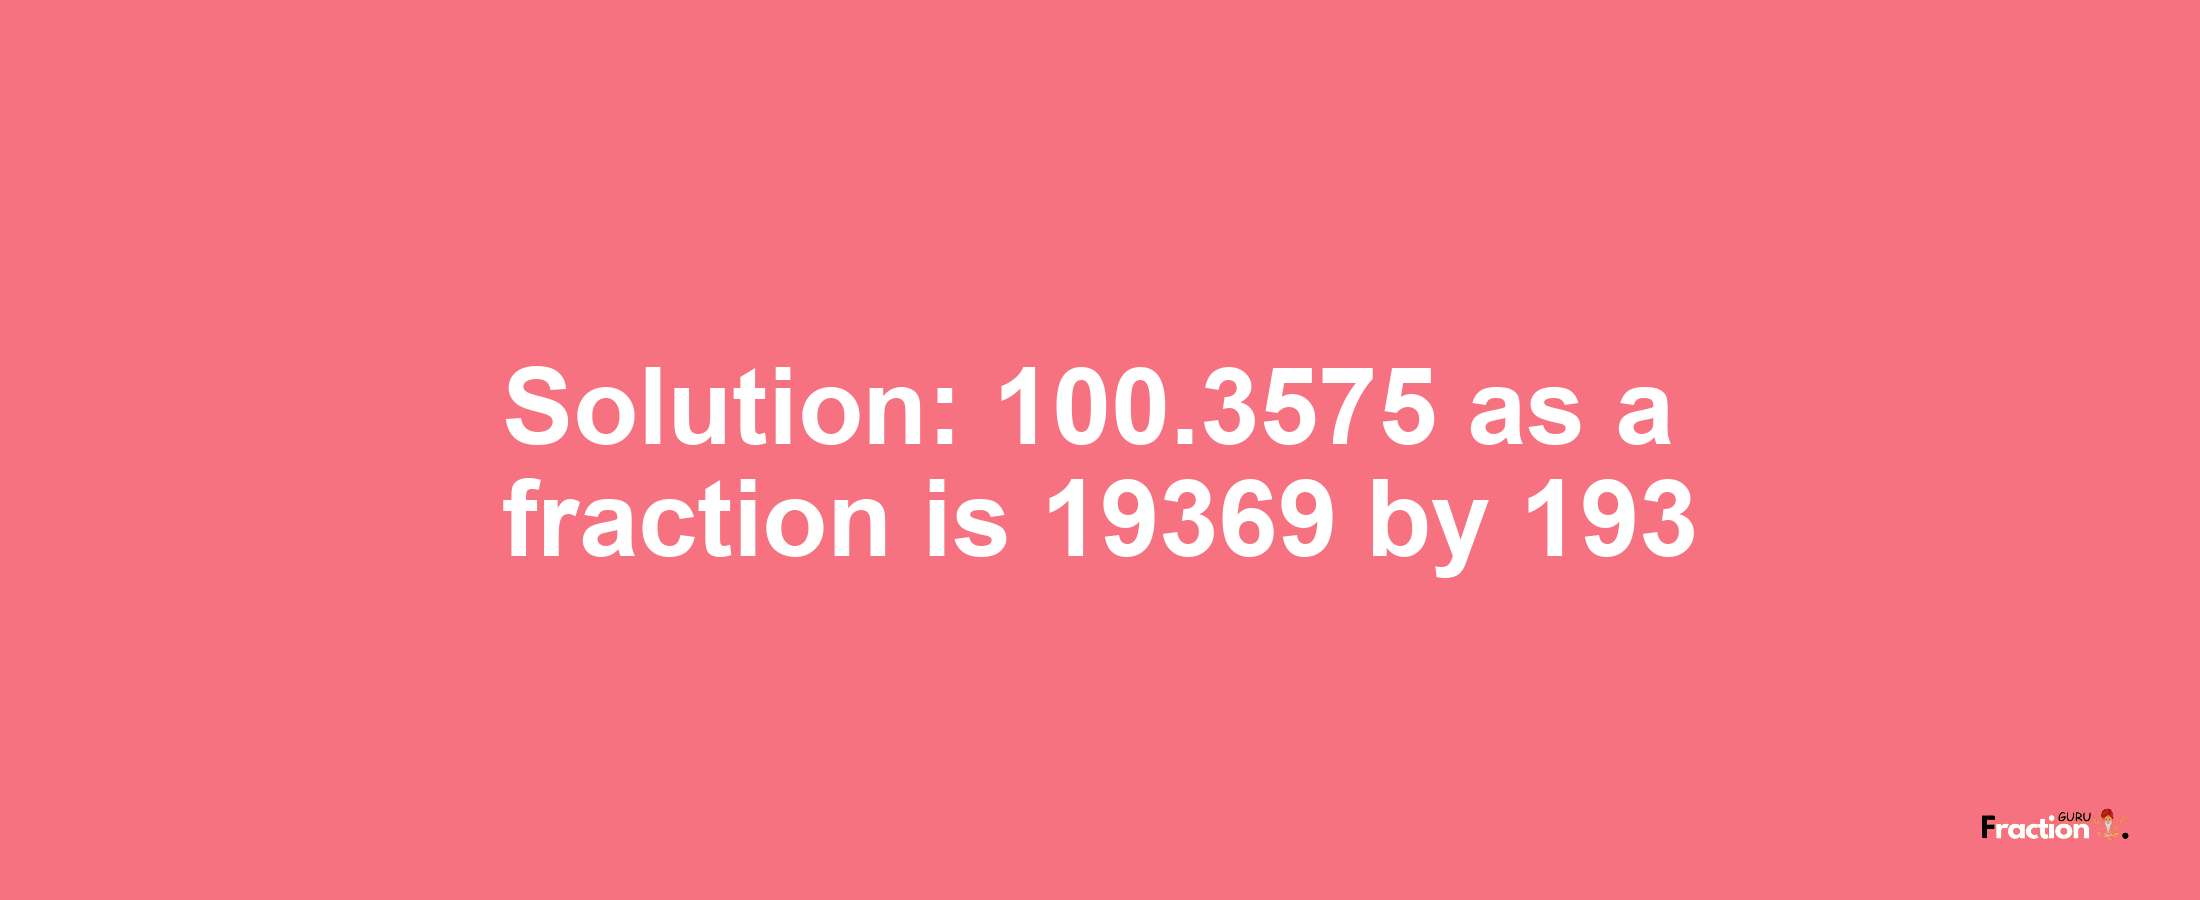 Solution:100.3575 as a fraction is 19369/193